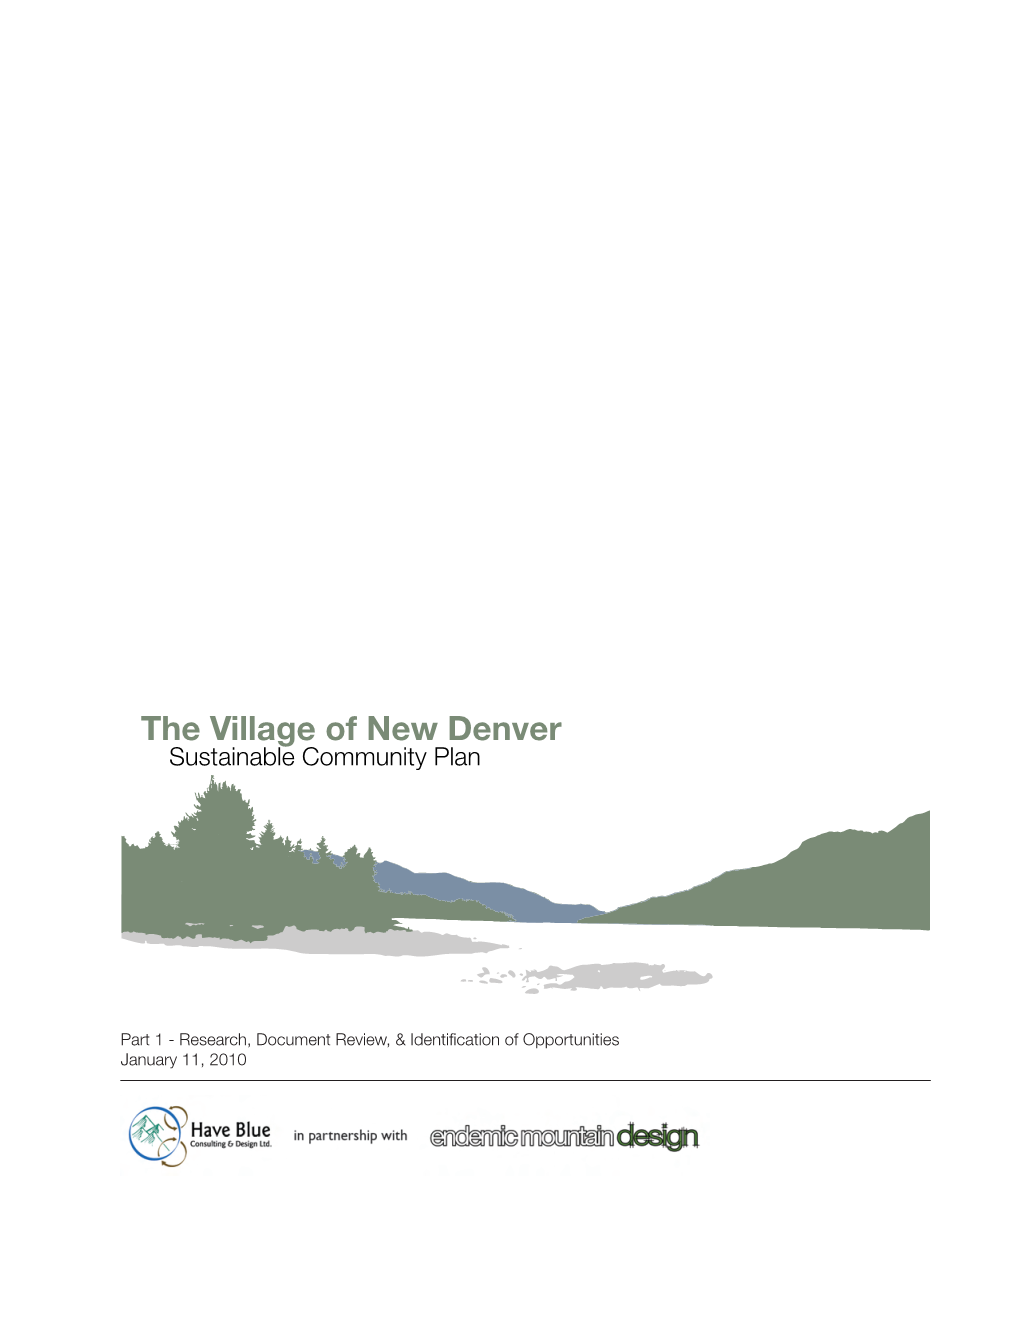 The Village of New Denver Sustainable Community Plan